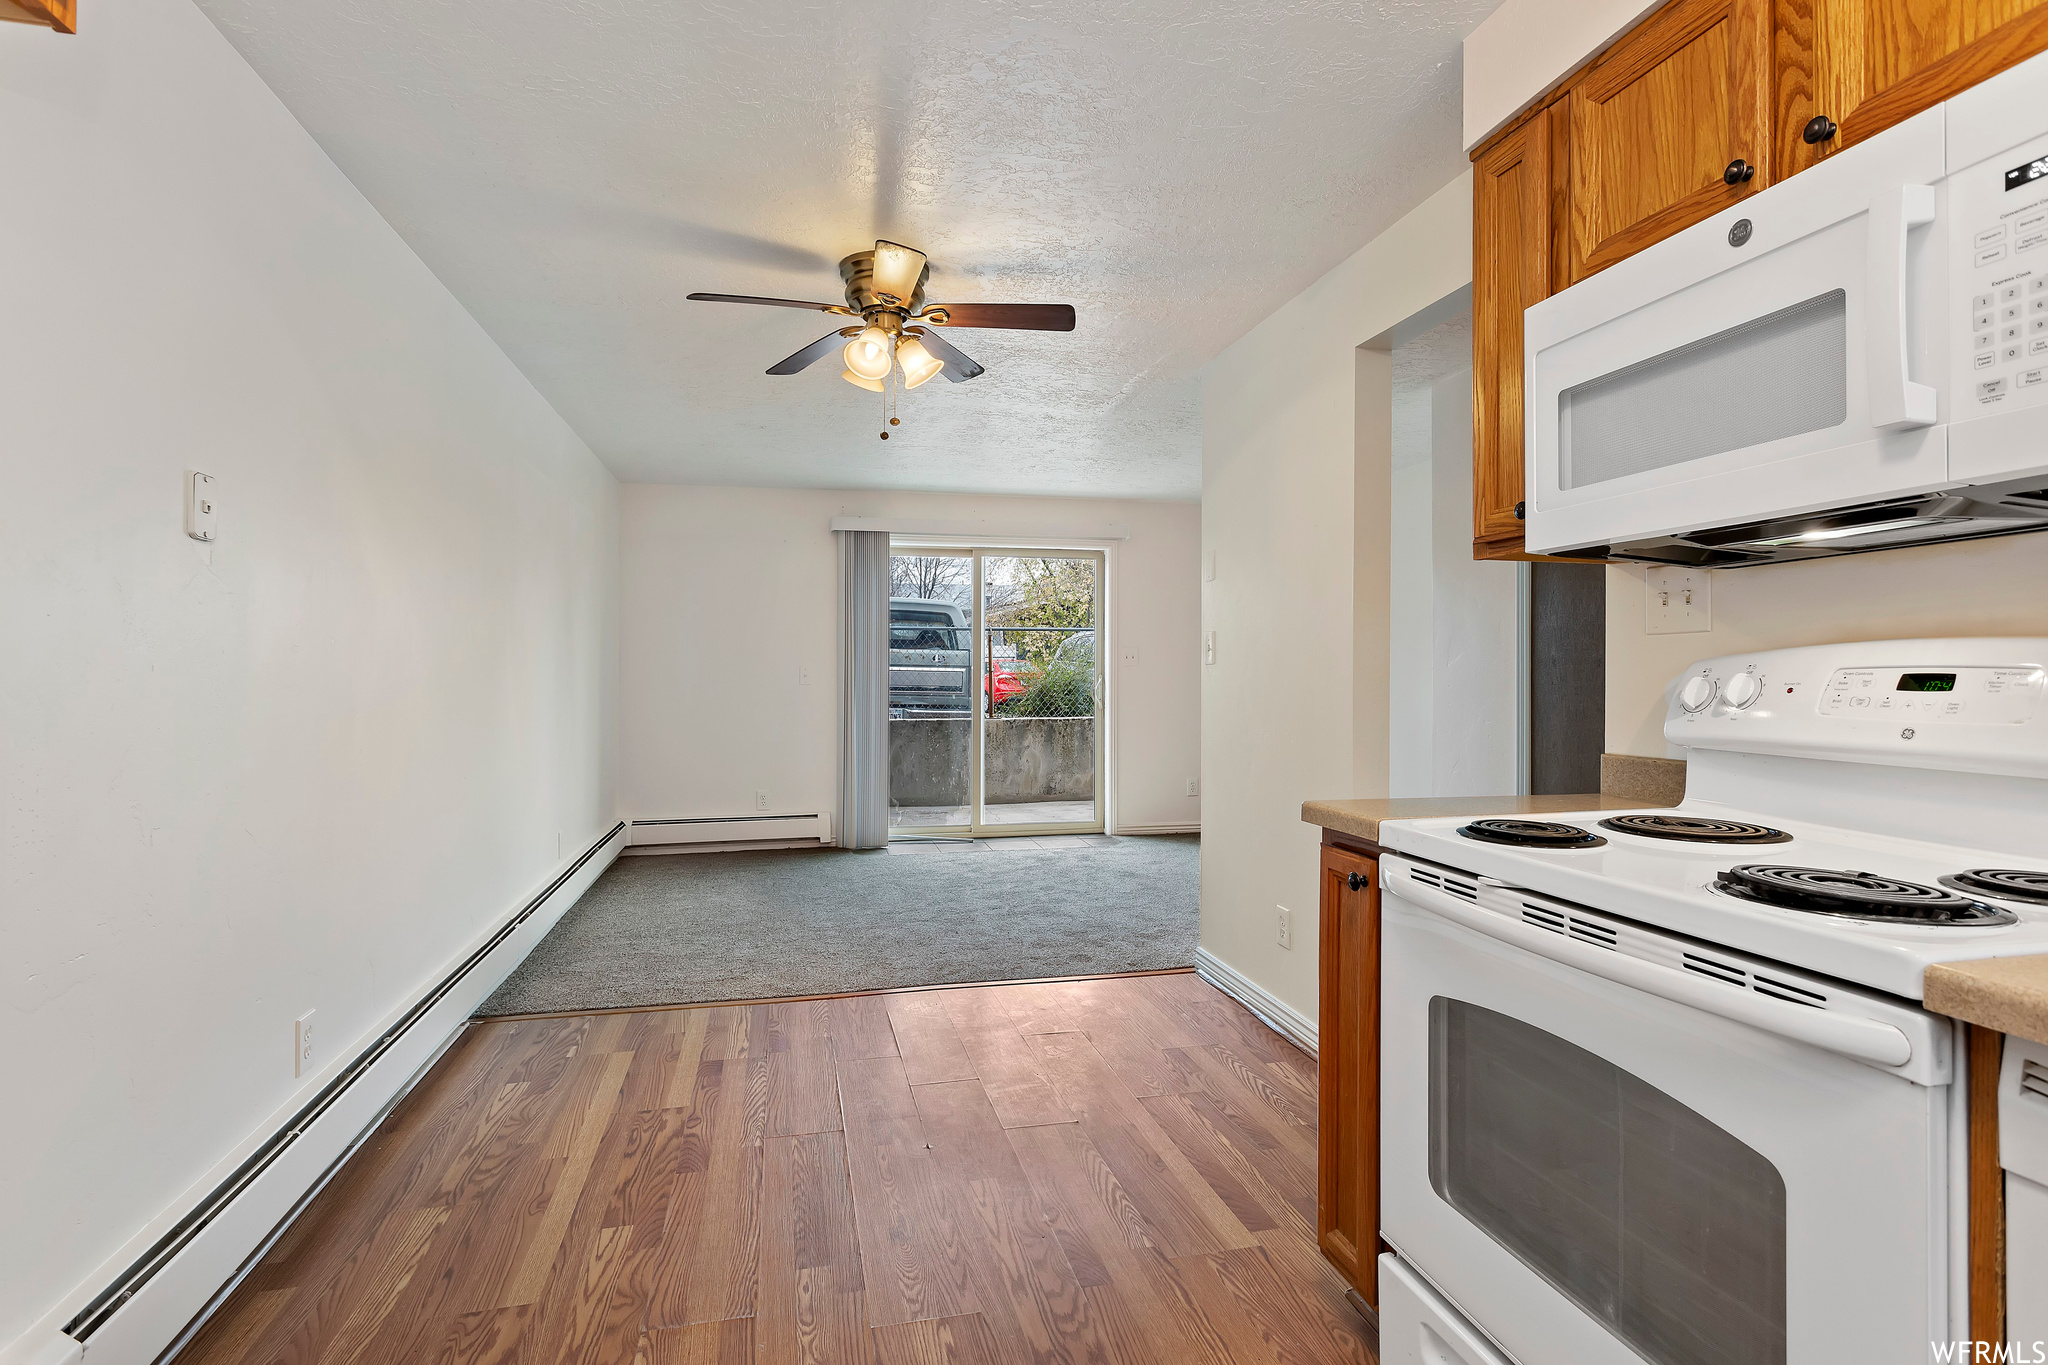 Kitchen featuring white appliances, ceiling fan, a baseboard radiator, and wood-type flooring